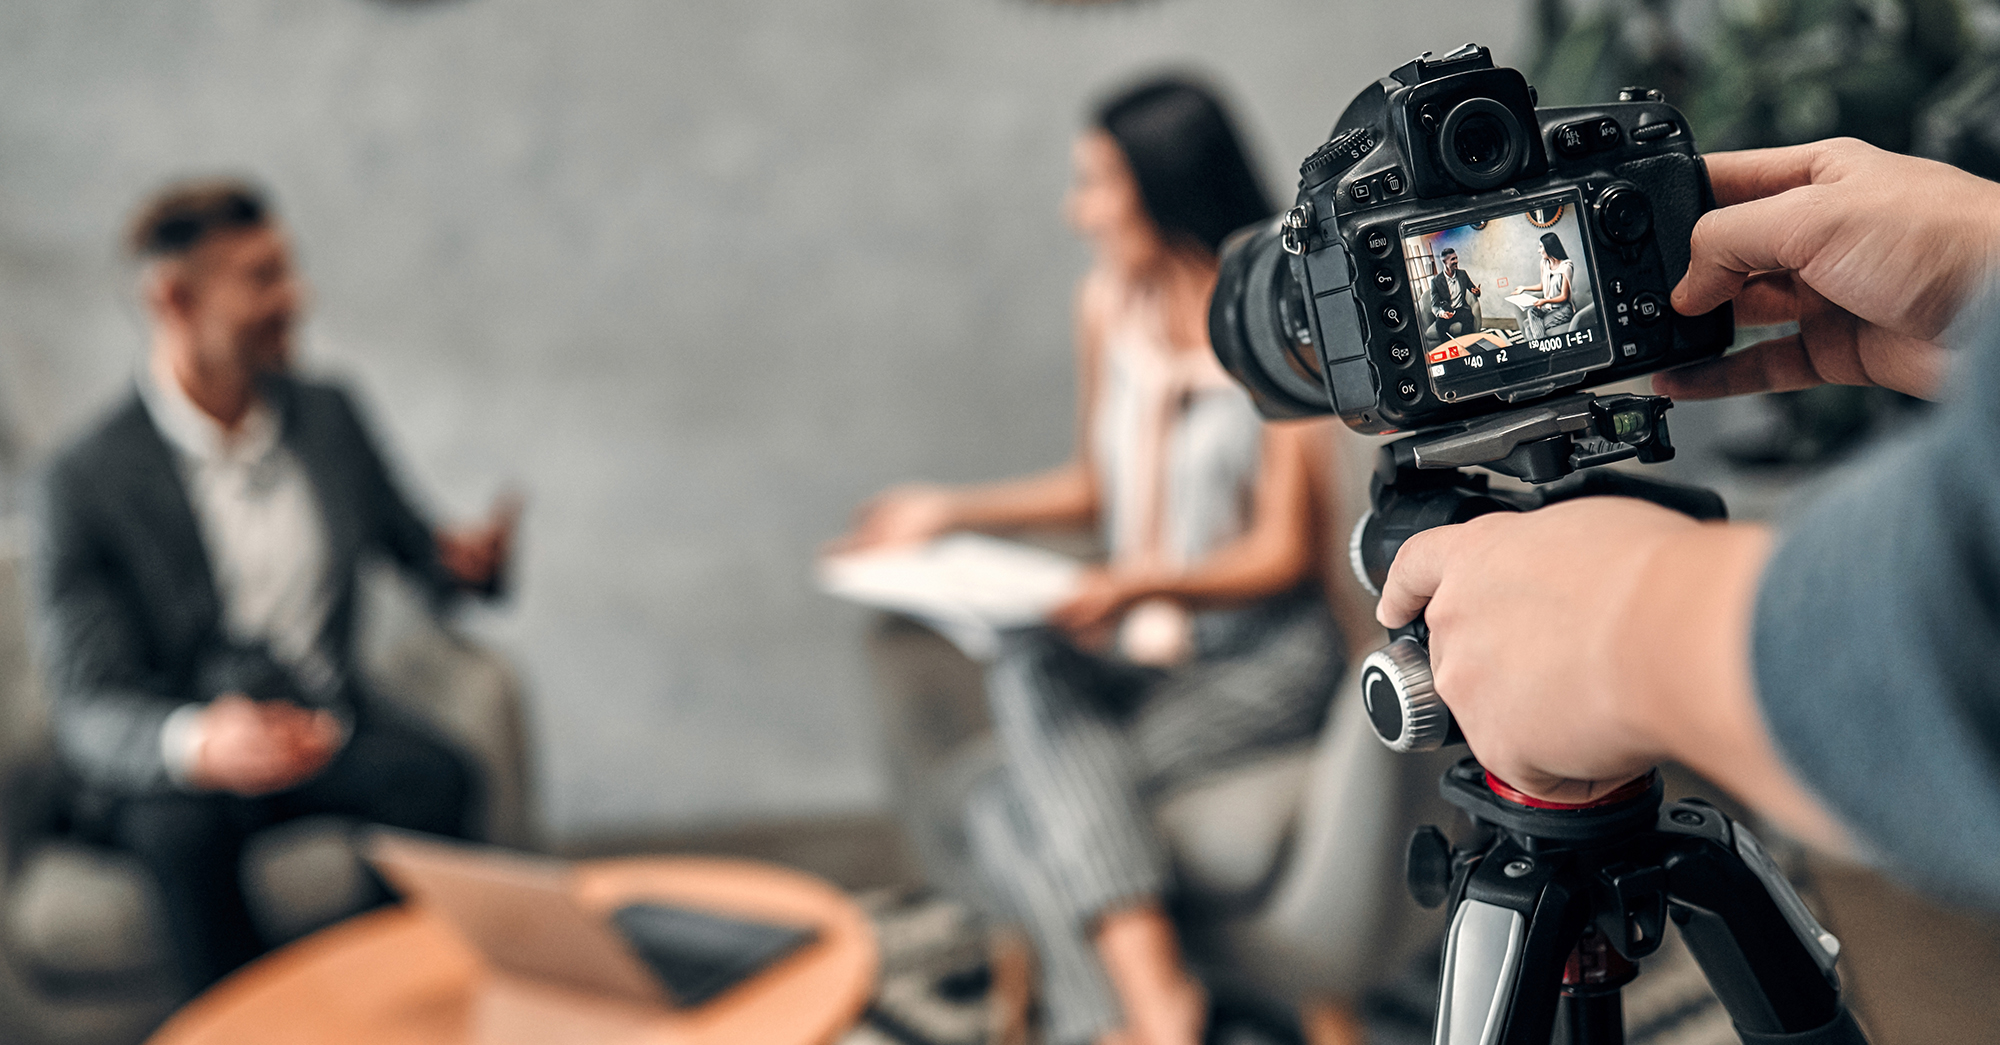 Lights! Camera! Action! Why Compliance Training Needs More Drama